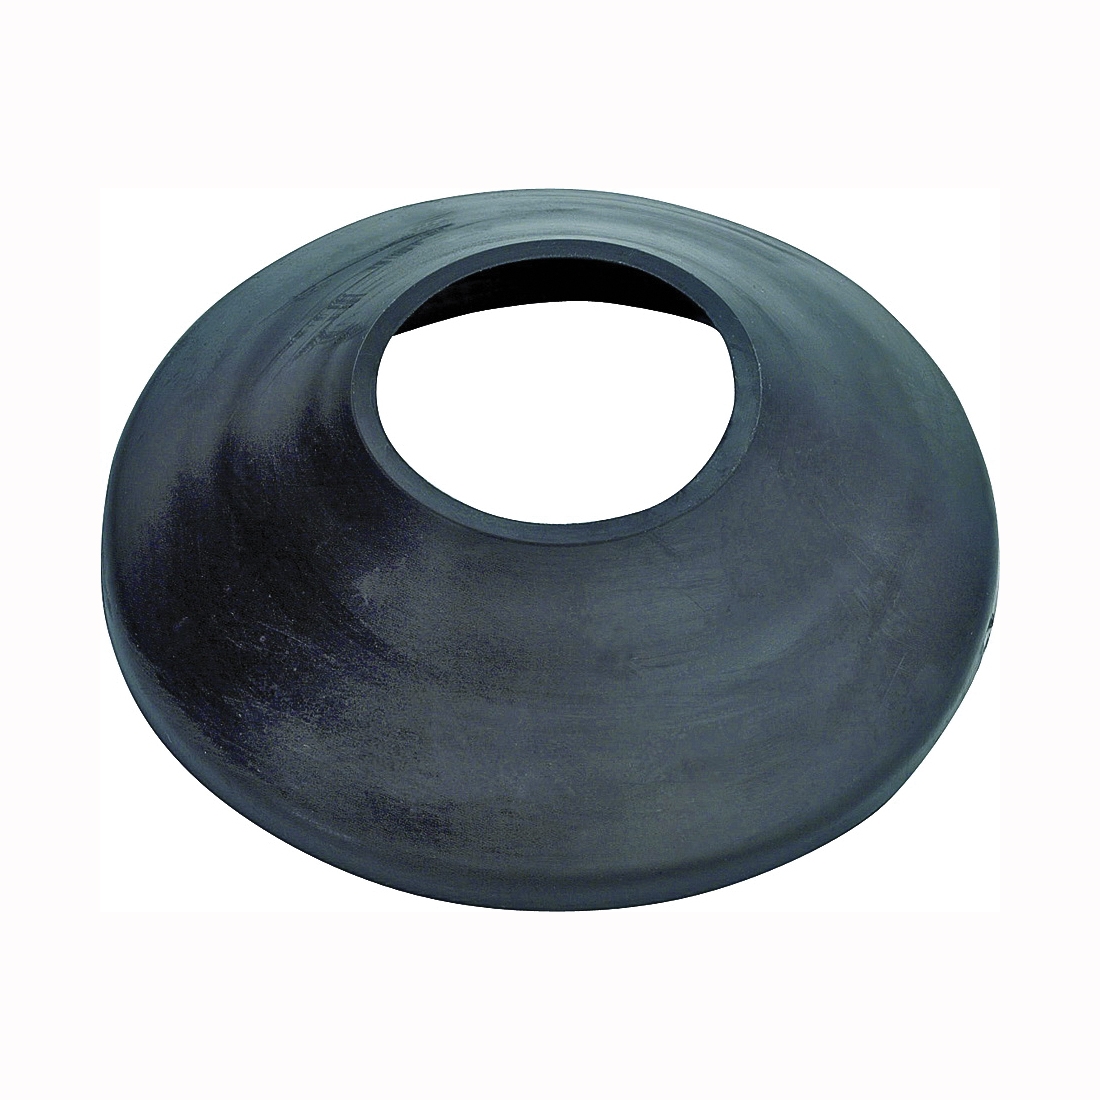 14205 Rain Collar, 1-1/4 to 1-1/2 in Vent Hole, Rubber